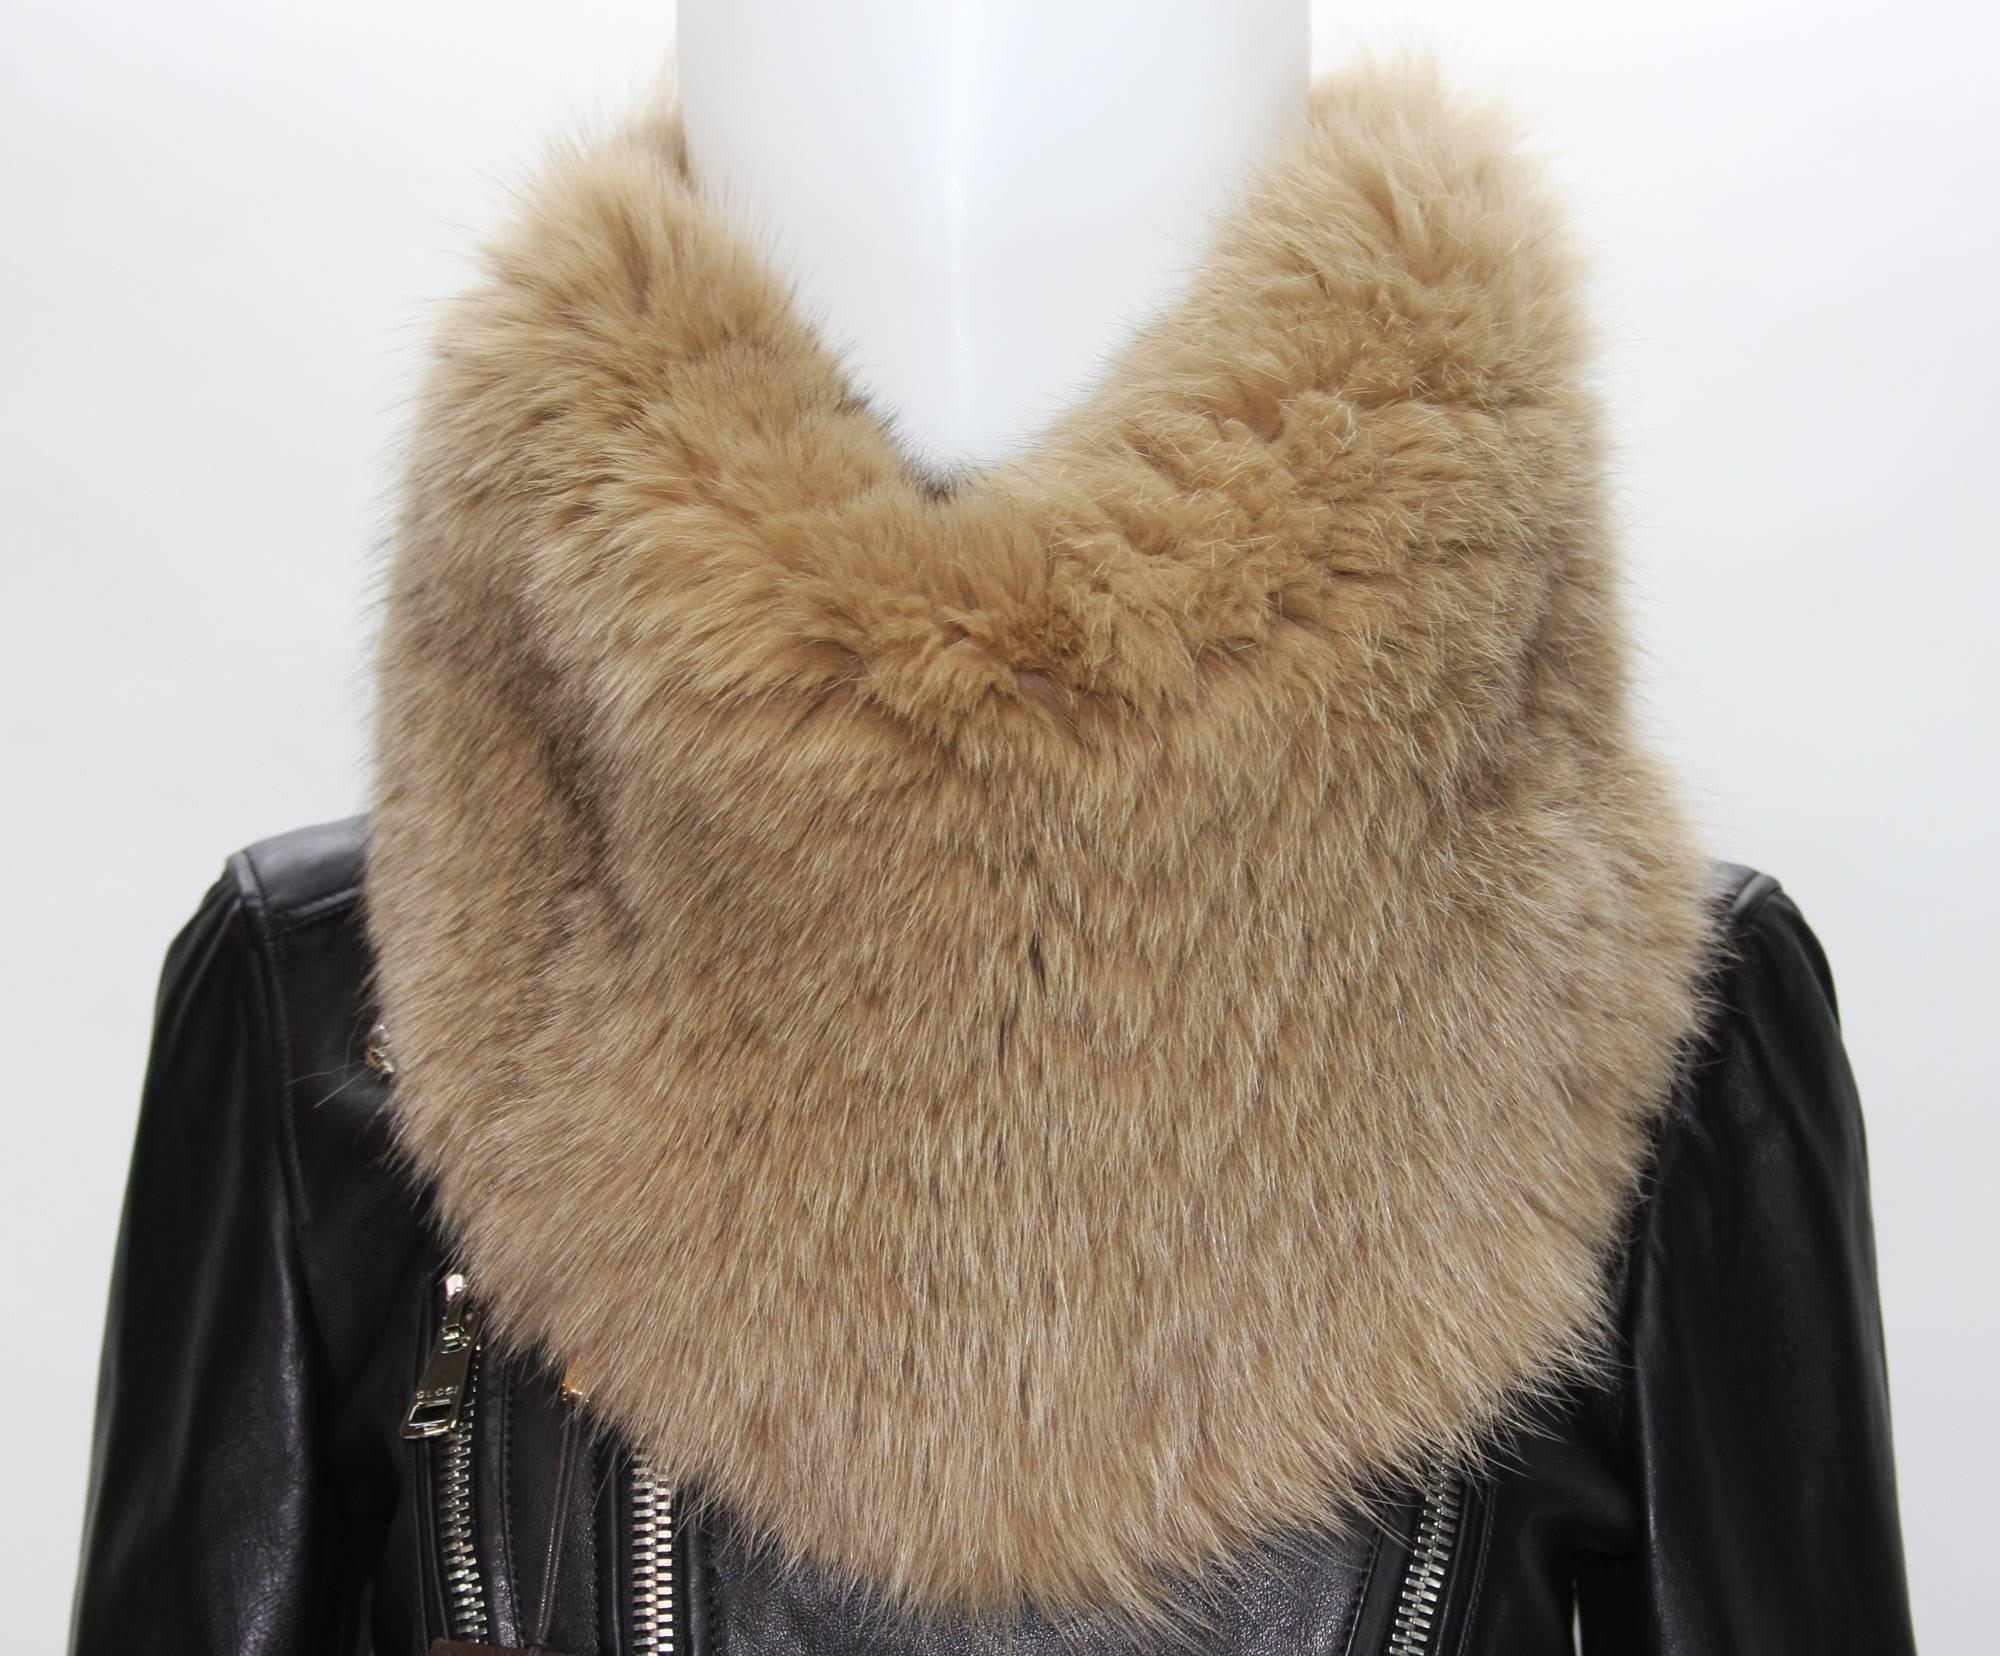 New GUCCI Fox Fur Ring Scarf
100% Real Dyed FOX
Lining – 75% Wool, 25% Angora (Very Soft)
Color – Dark Beige
Measurements: 29 inches Around, Width – 11 inches + Fur at Front, 7 inches + Fur at Back.
Made in Italy
New with Tag.